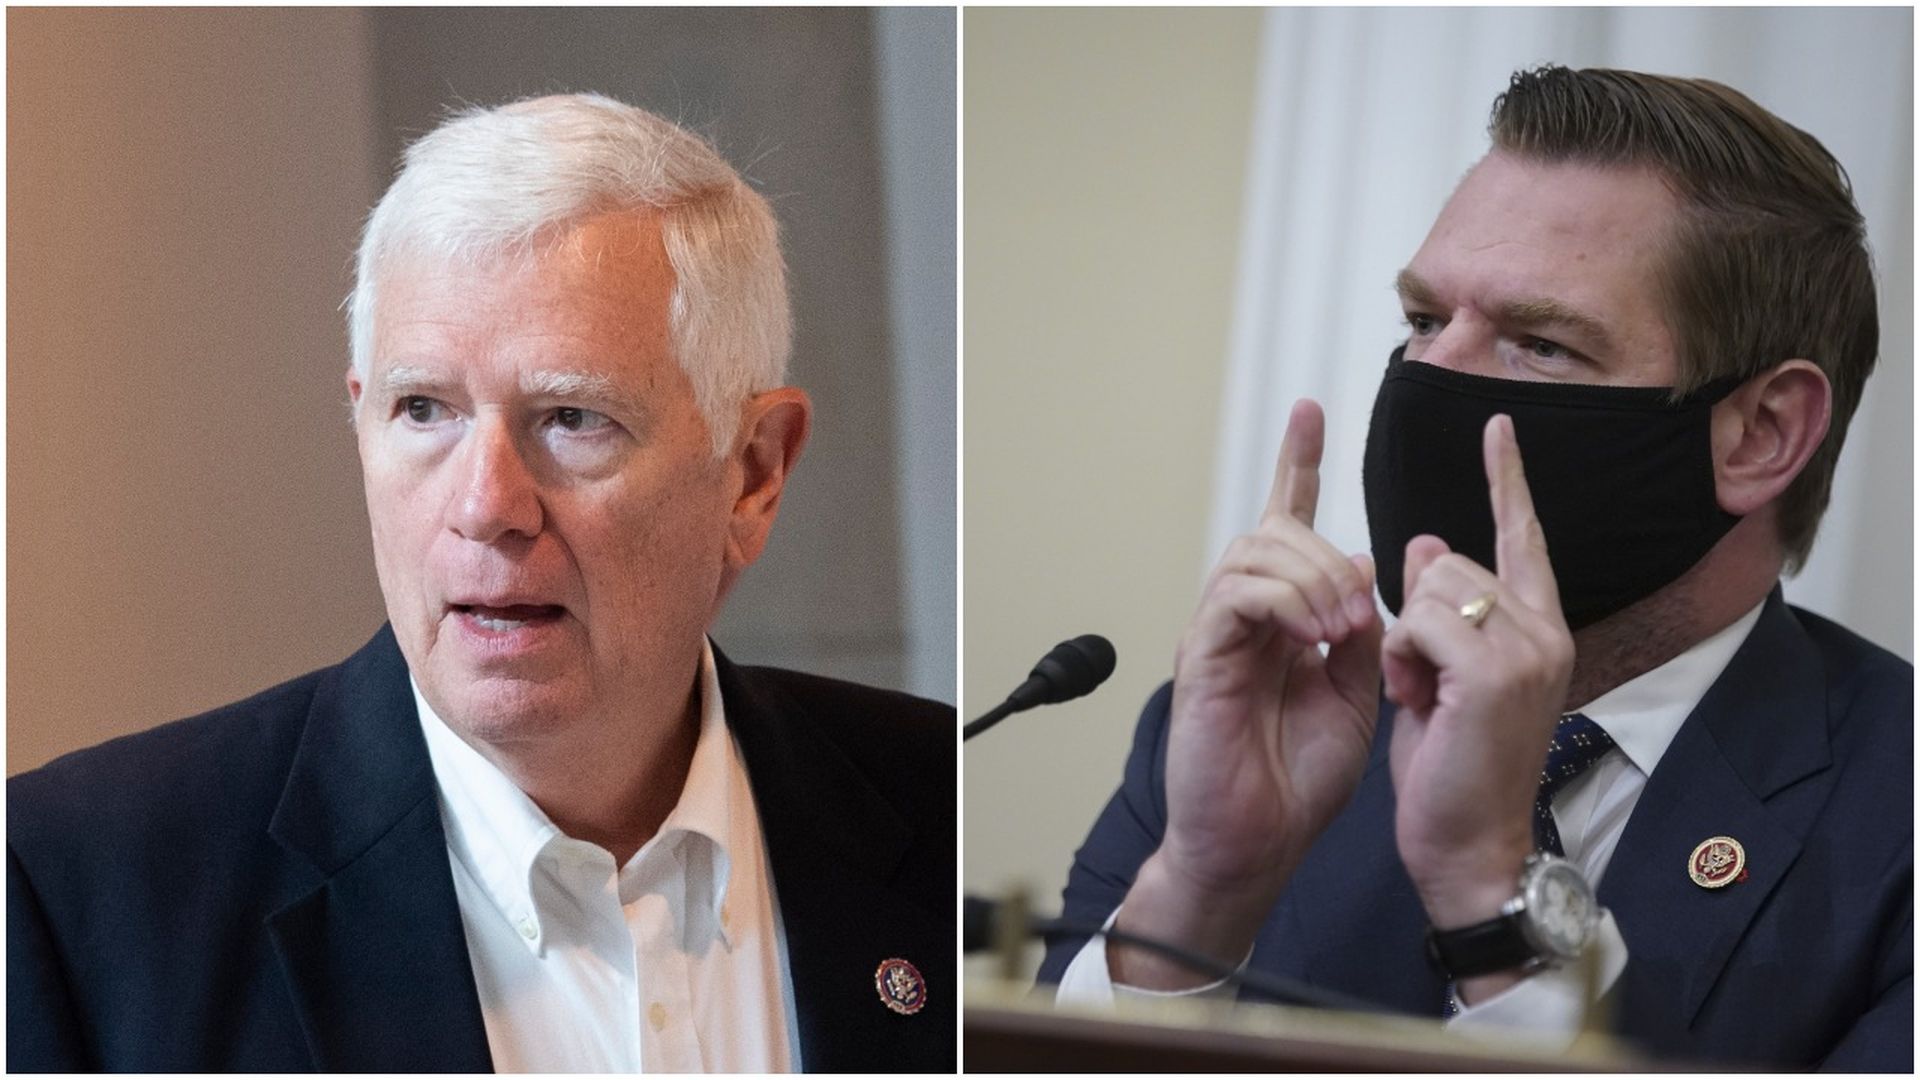 Combination images of Reps. Mo Brooks and Eric Swalwell.